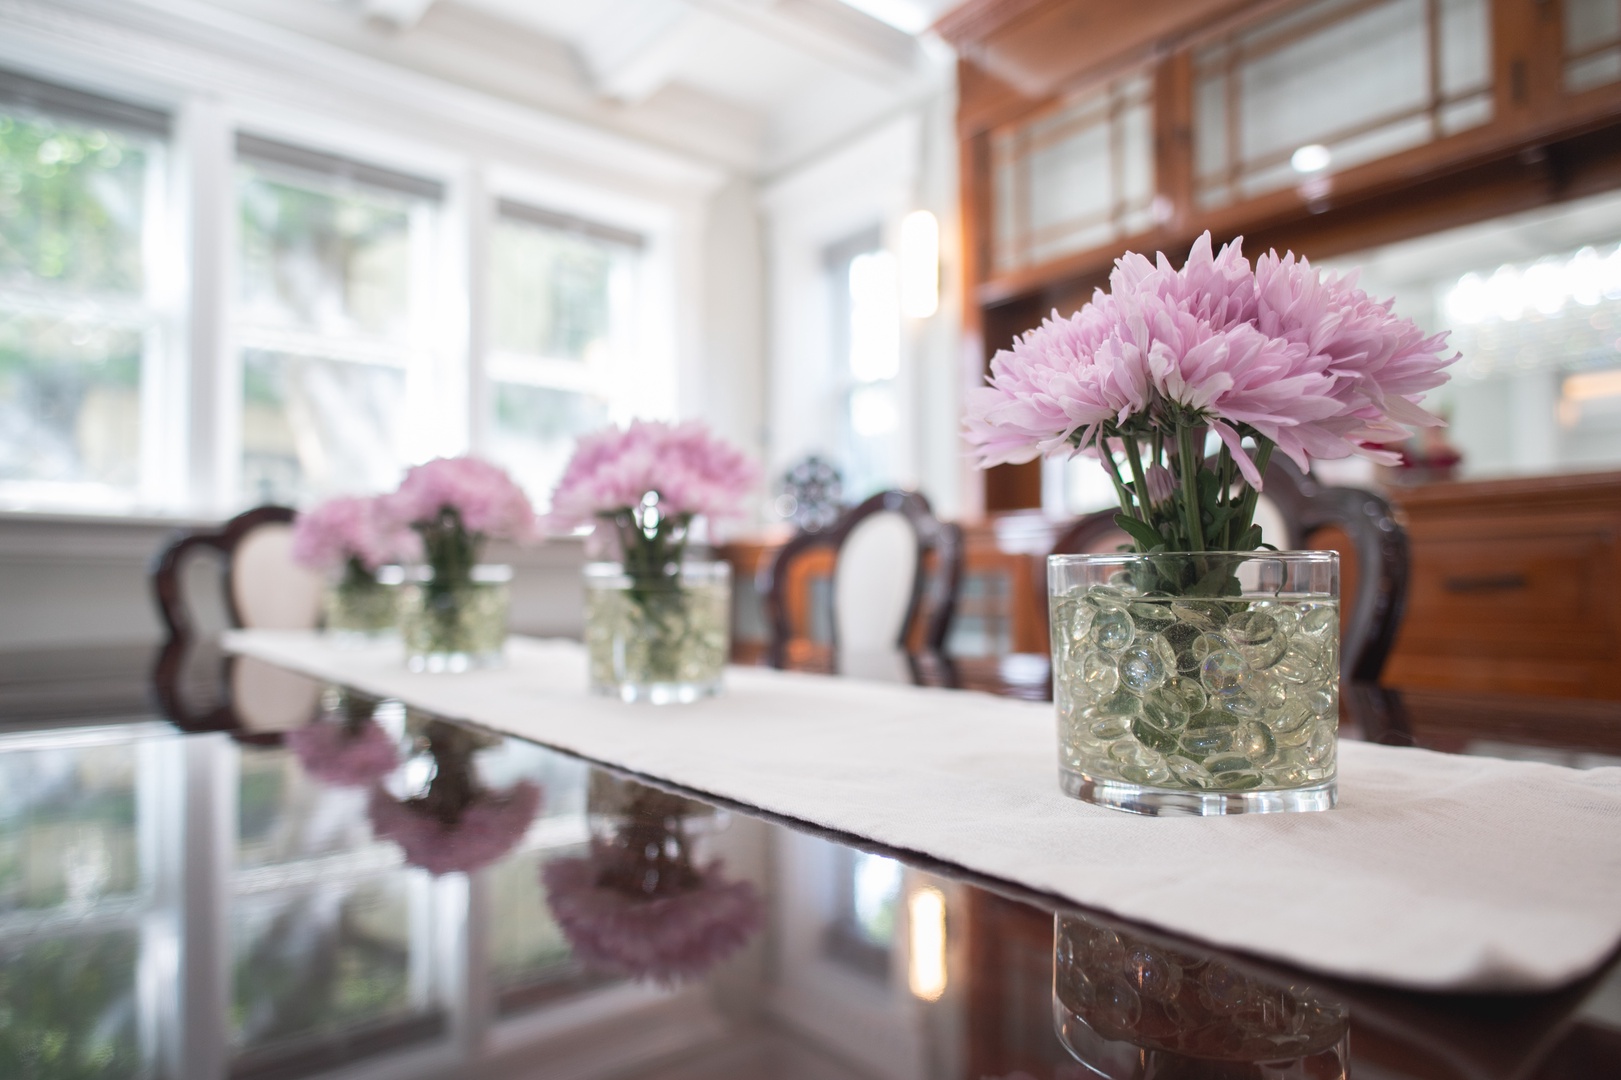 Elegant formal meals can be enjoyed in the dining room, offering seating for 6